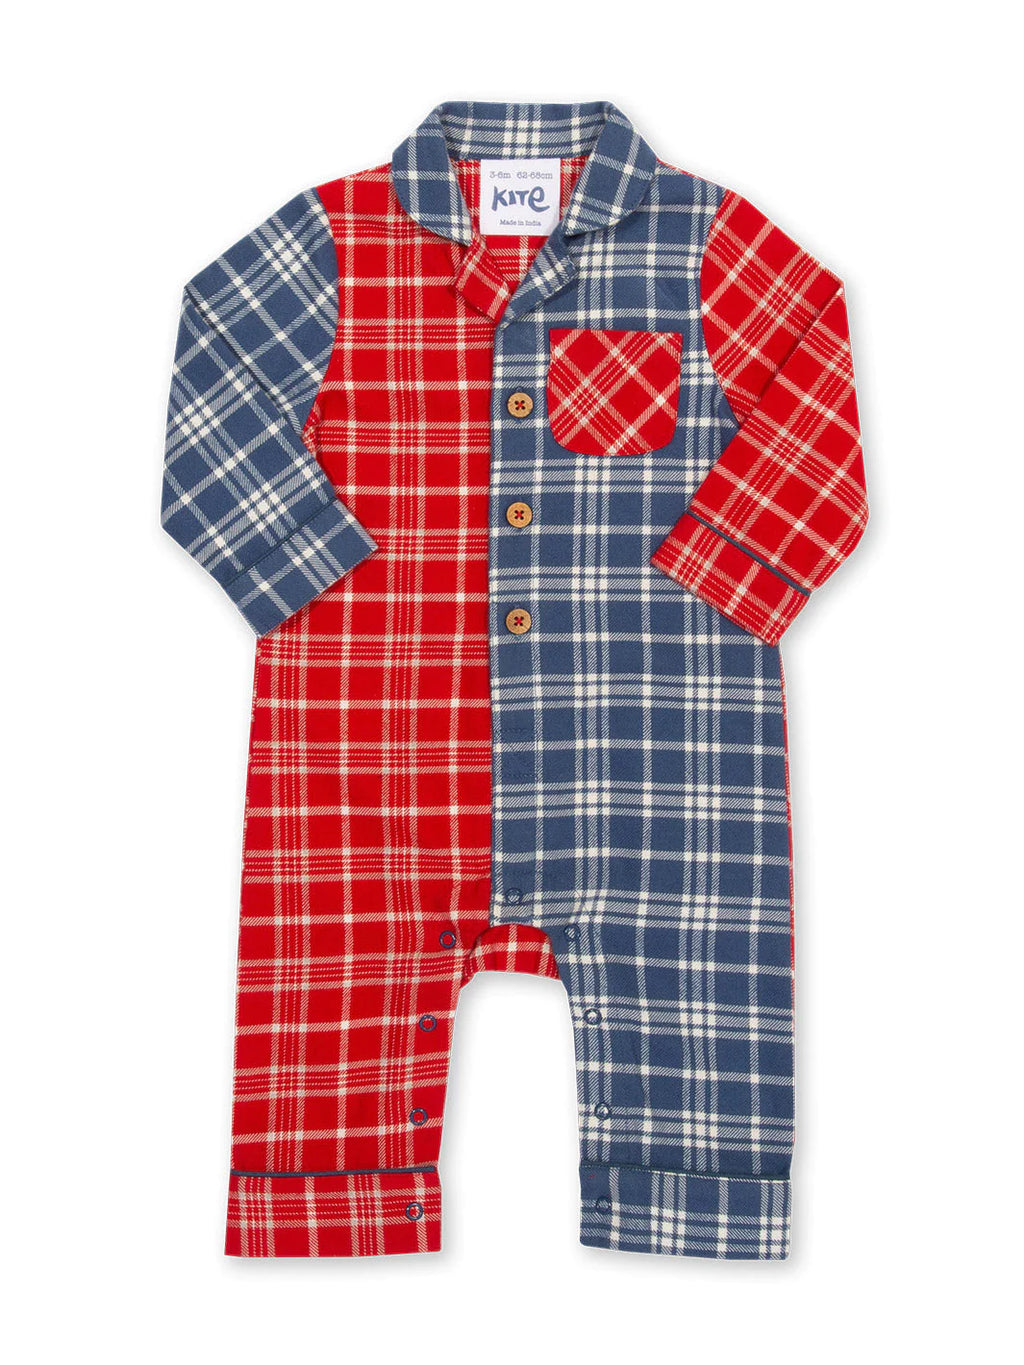 Kite Clothing Red & Navy Hotchpotch Checkered Baby Romper Christmas